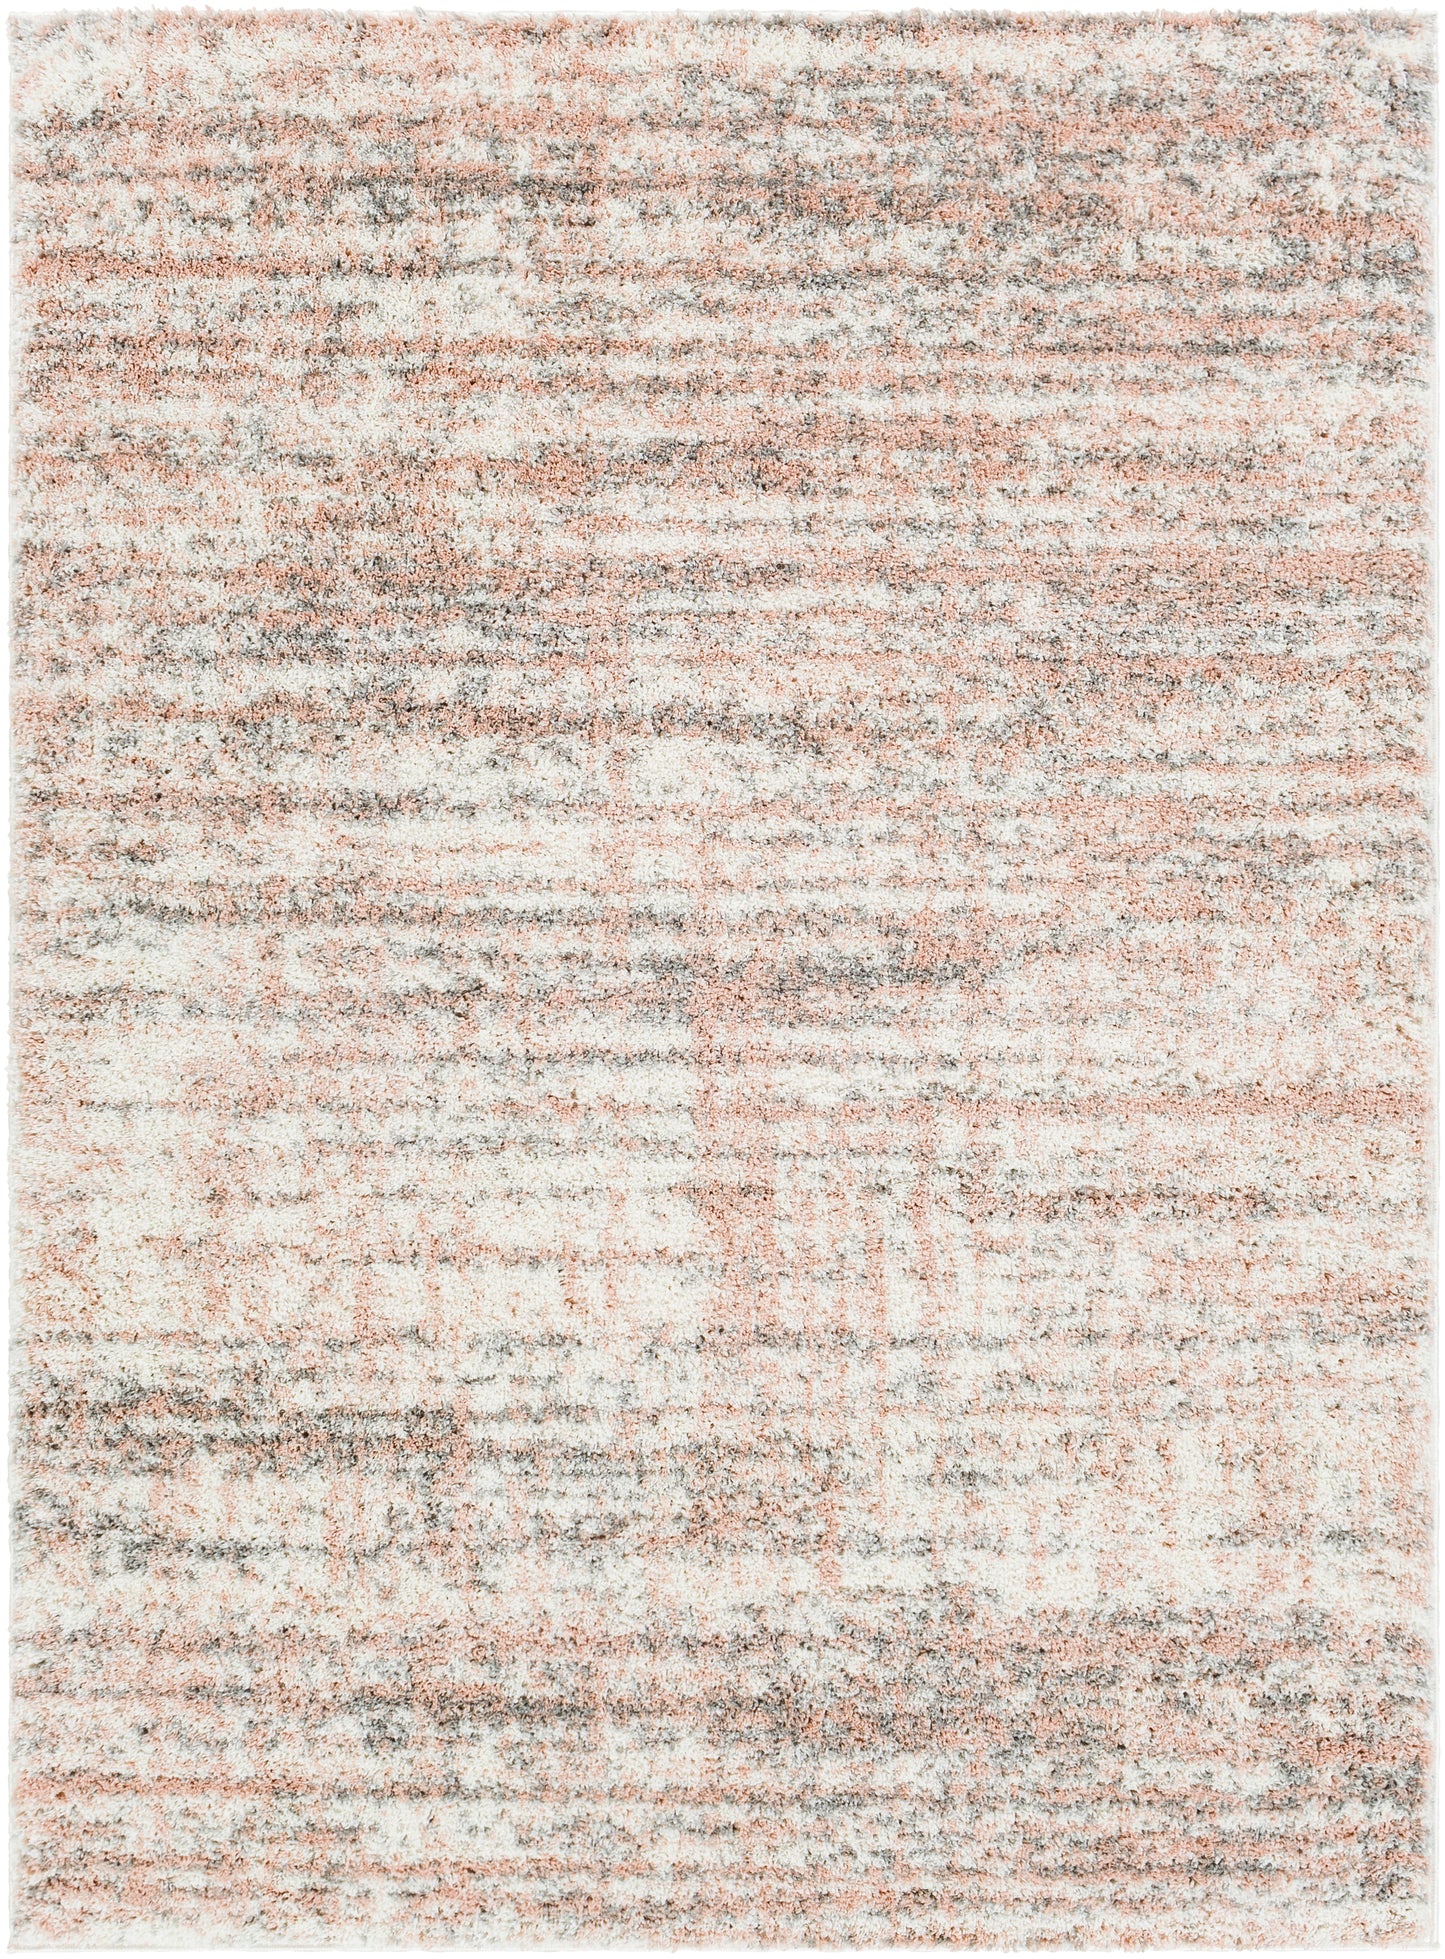 Aliyah shag 26300 Machine Woven Synthetic Blend Indoor Area Rug by Surya Rugs